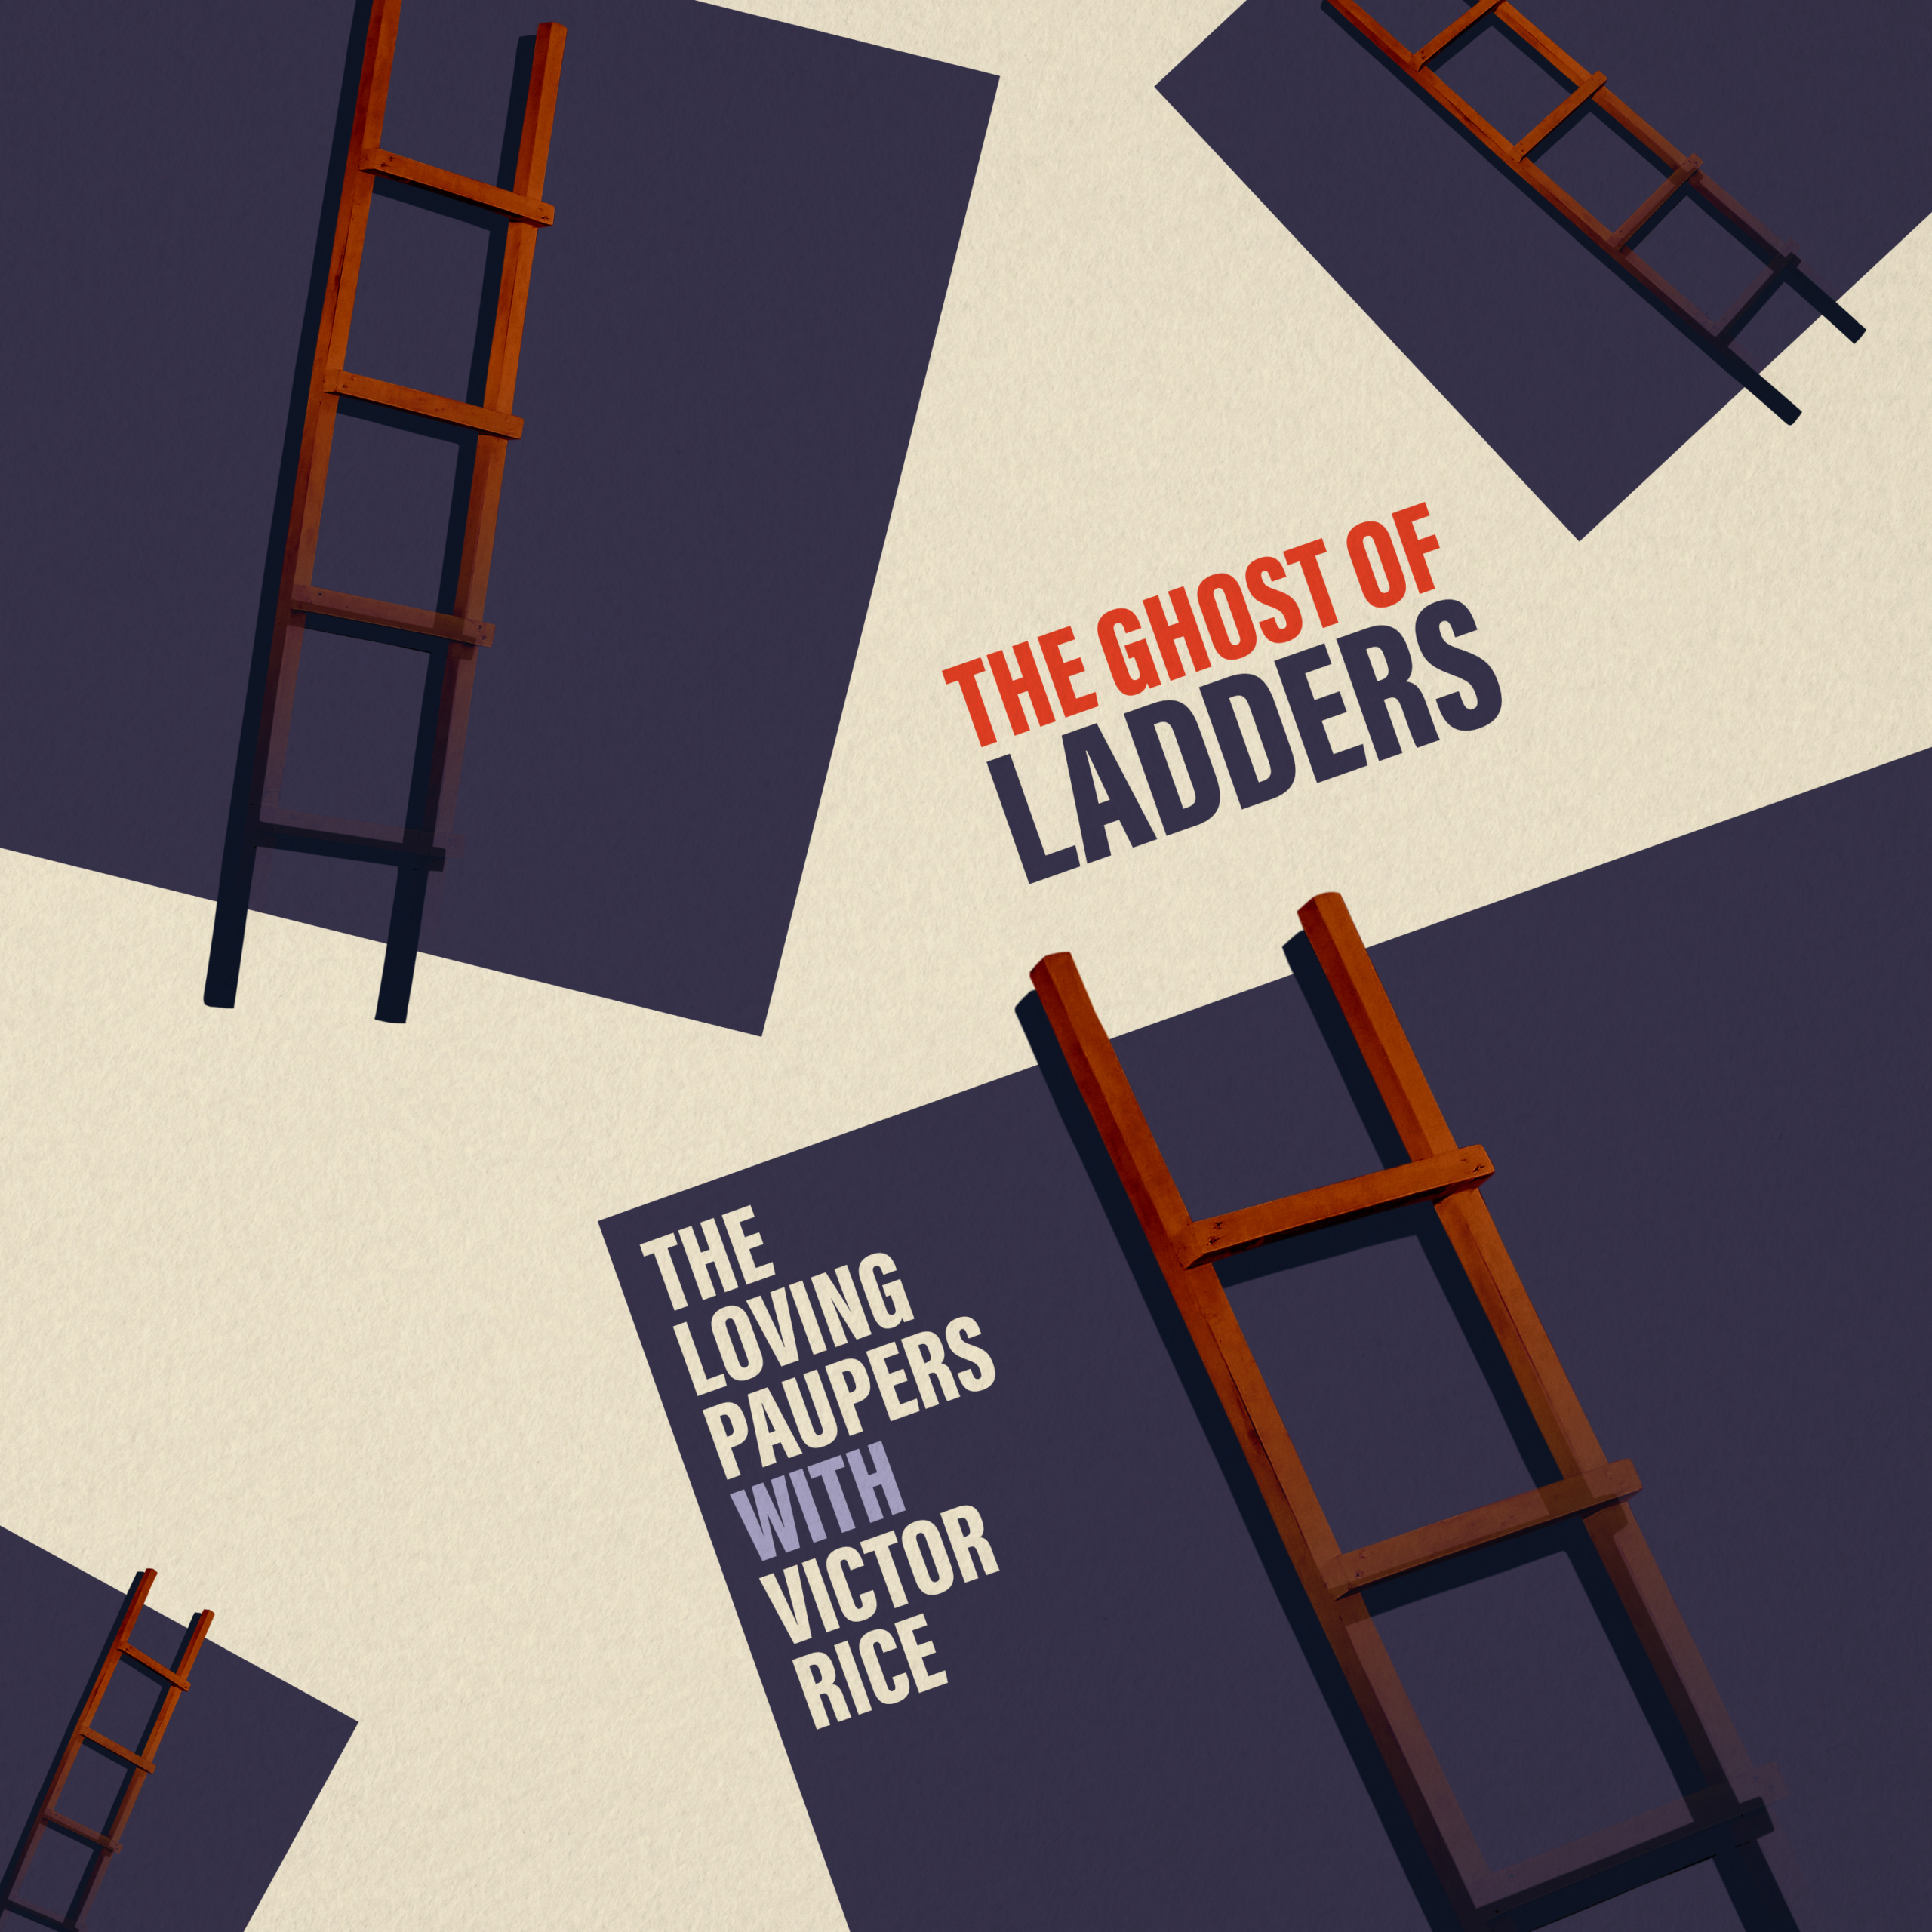 THE GHOST OF LADDERS FROM THE LOVING PAUPERS & VICTOR RICE RELEASES TODAY